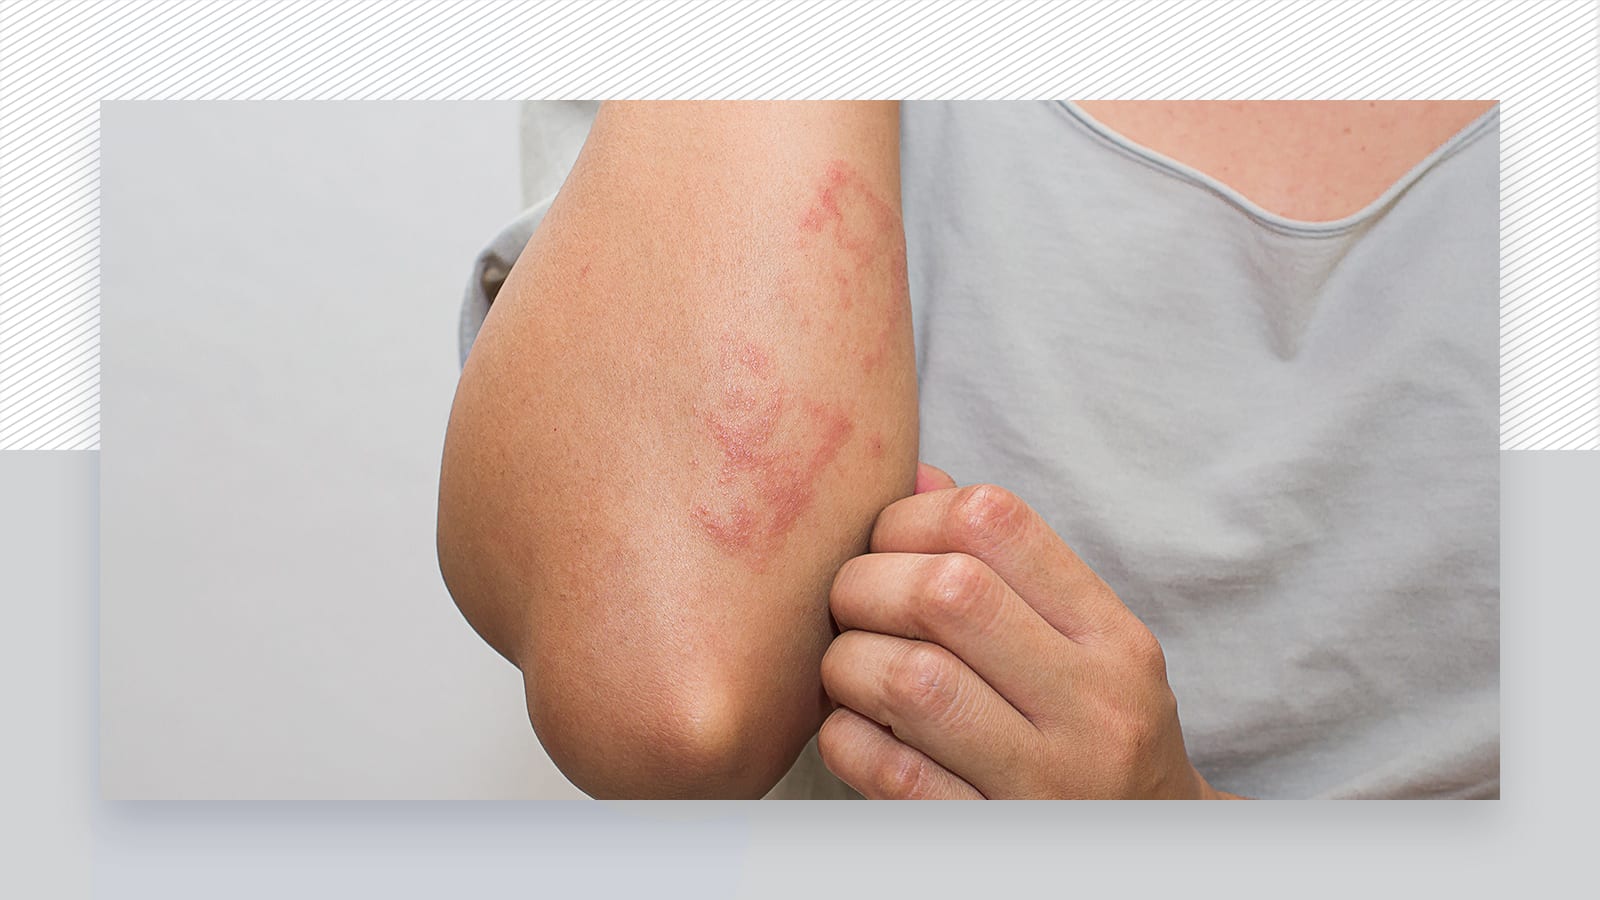 Yes you can have laser if you have eczema